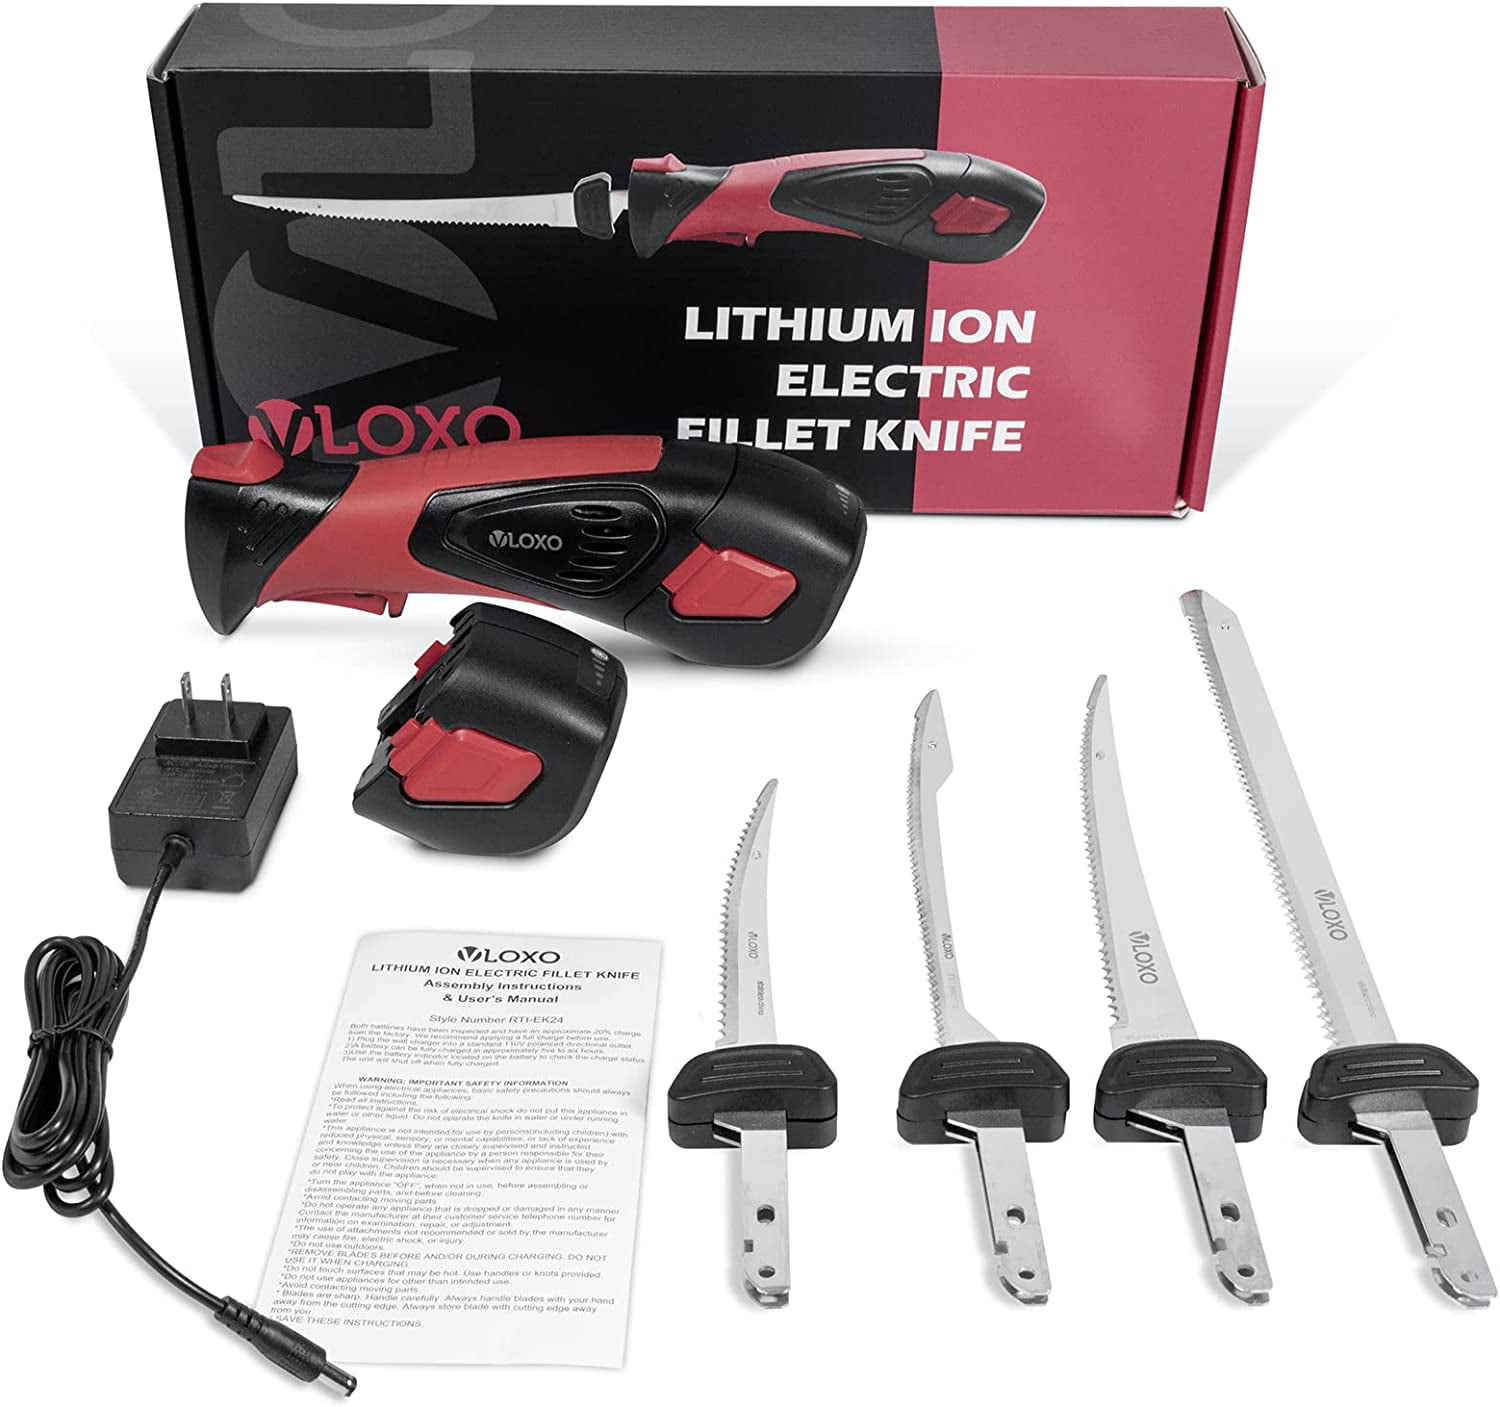 LITHIUM ION ELECTRIC FILLET KNIFE - Gellco Outdoors